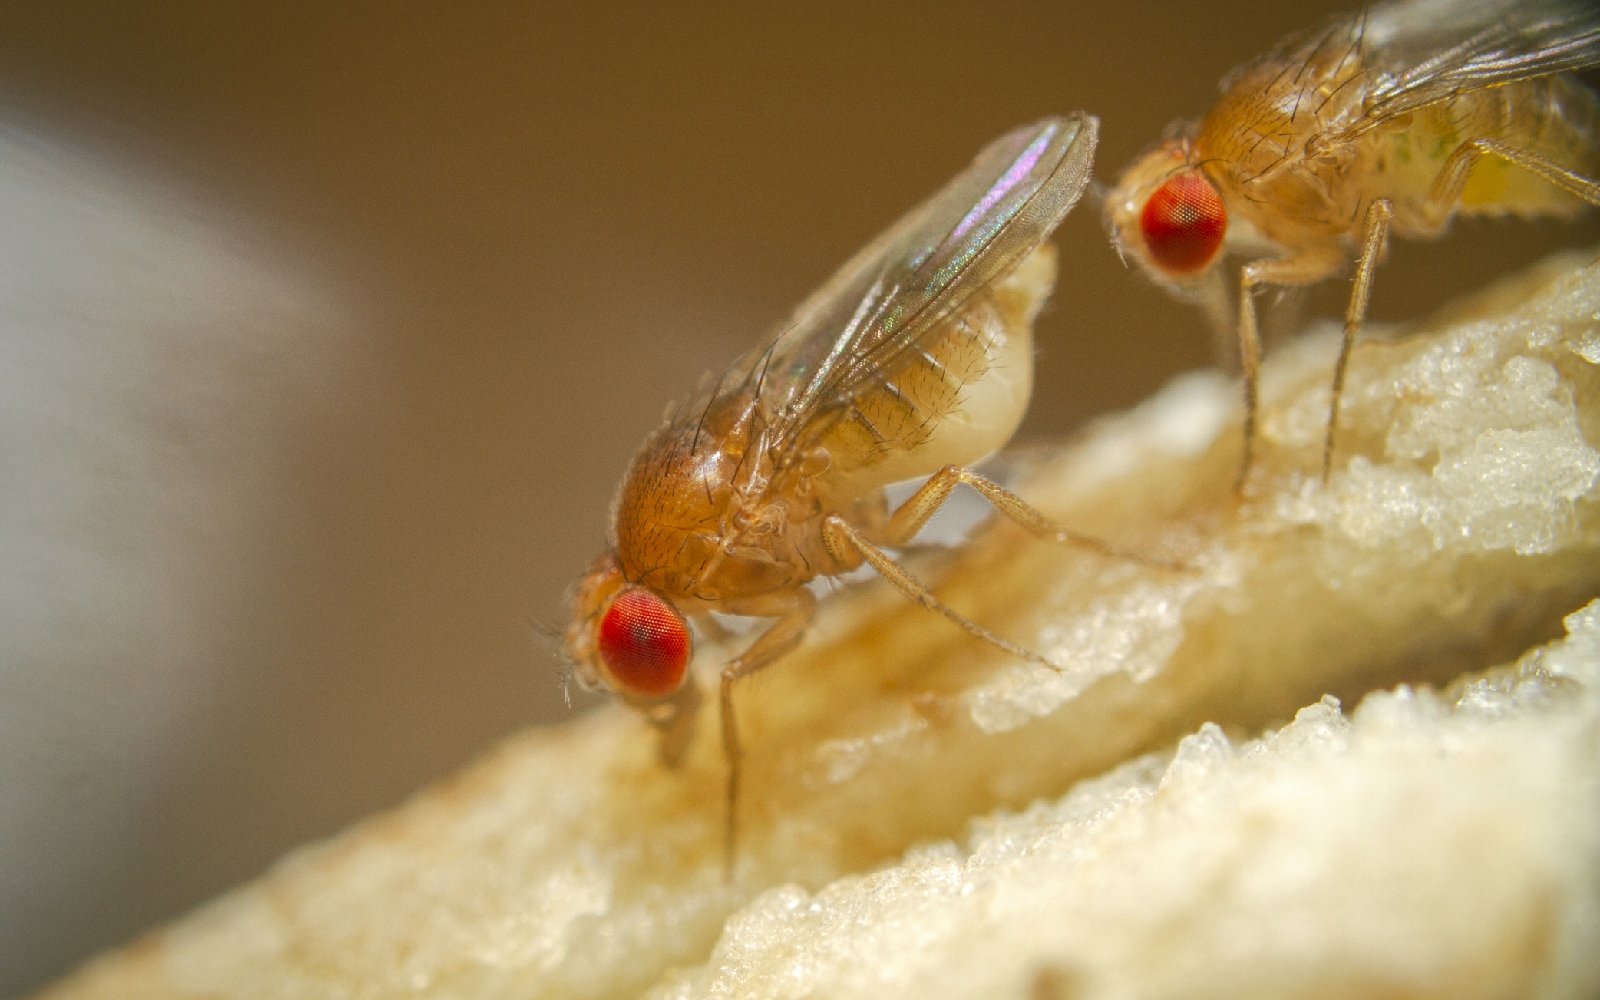 How to Get Rid of Annoying Gnats Without Using Pesticides